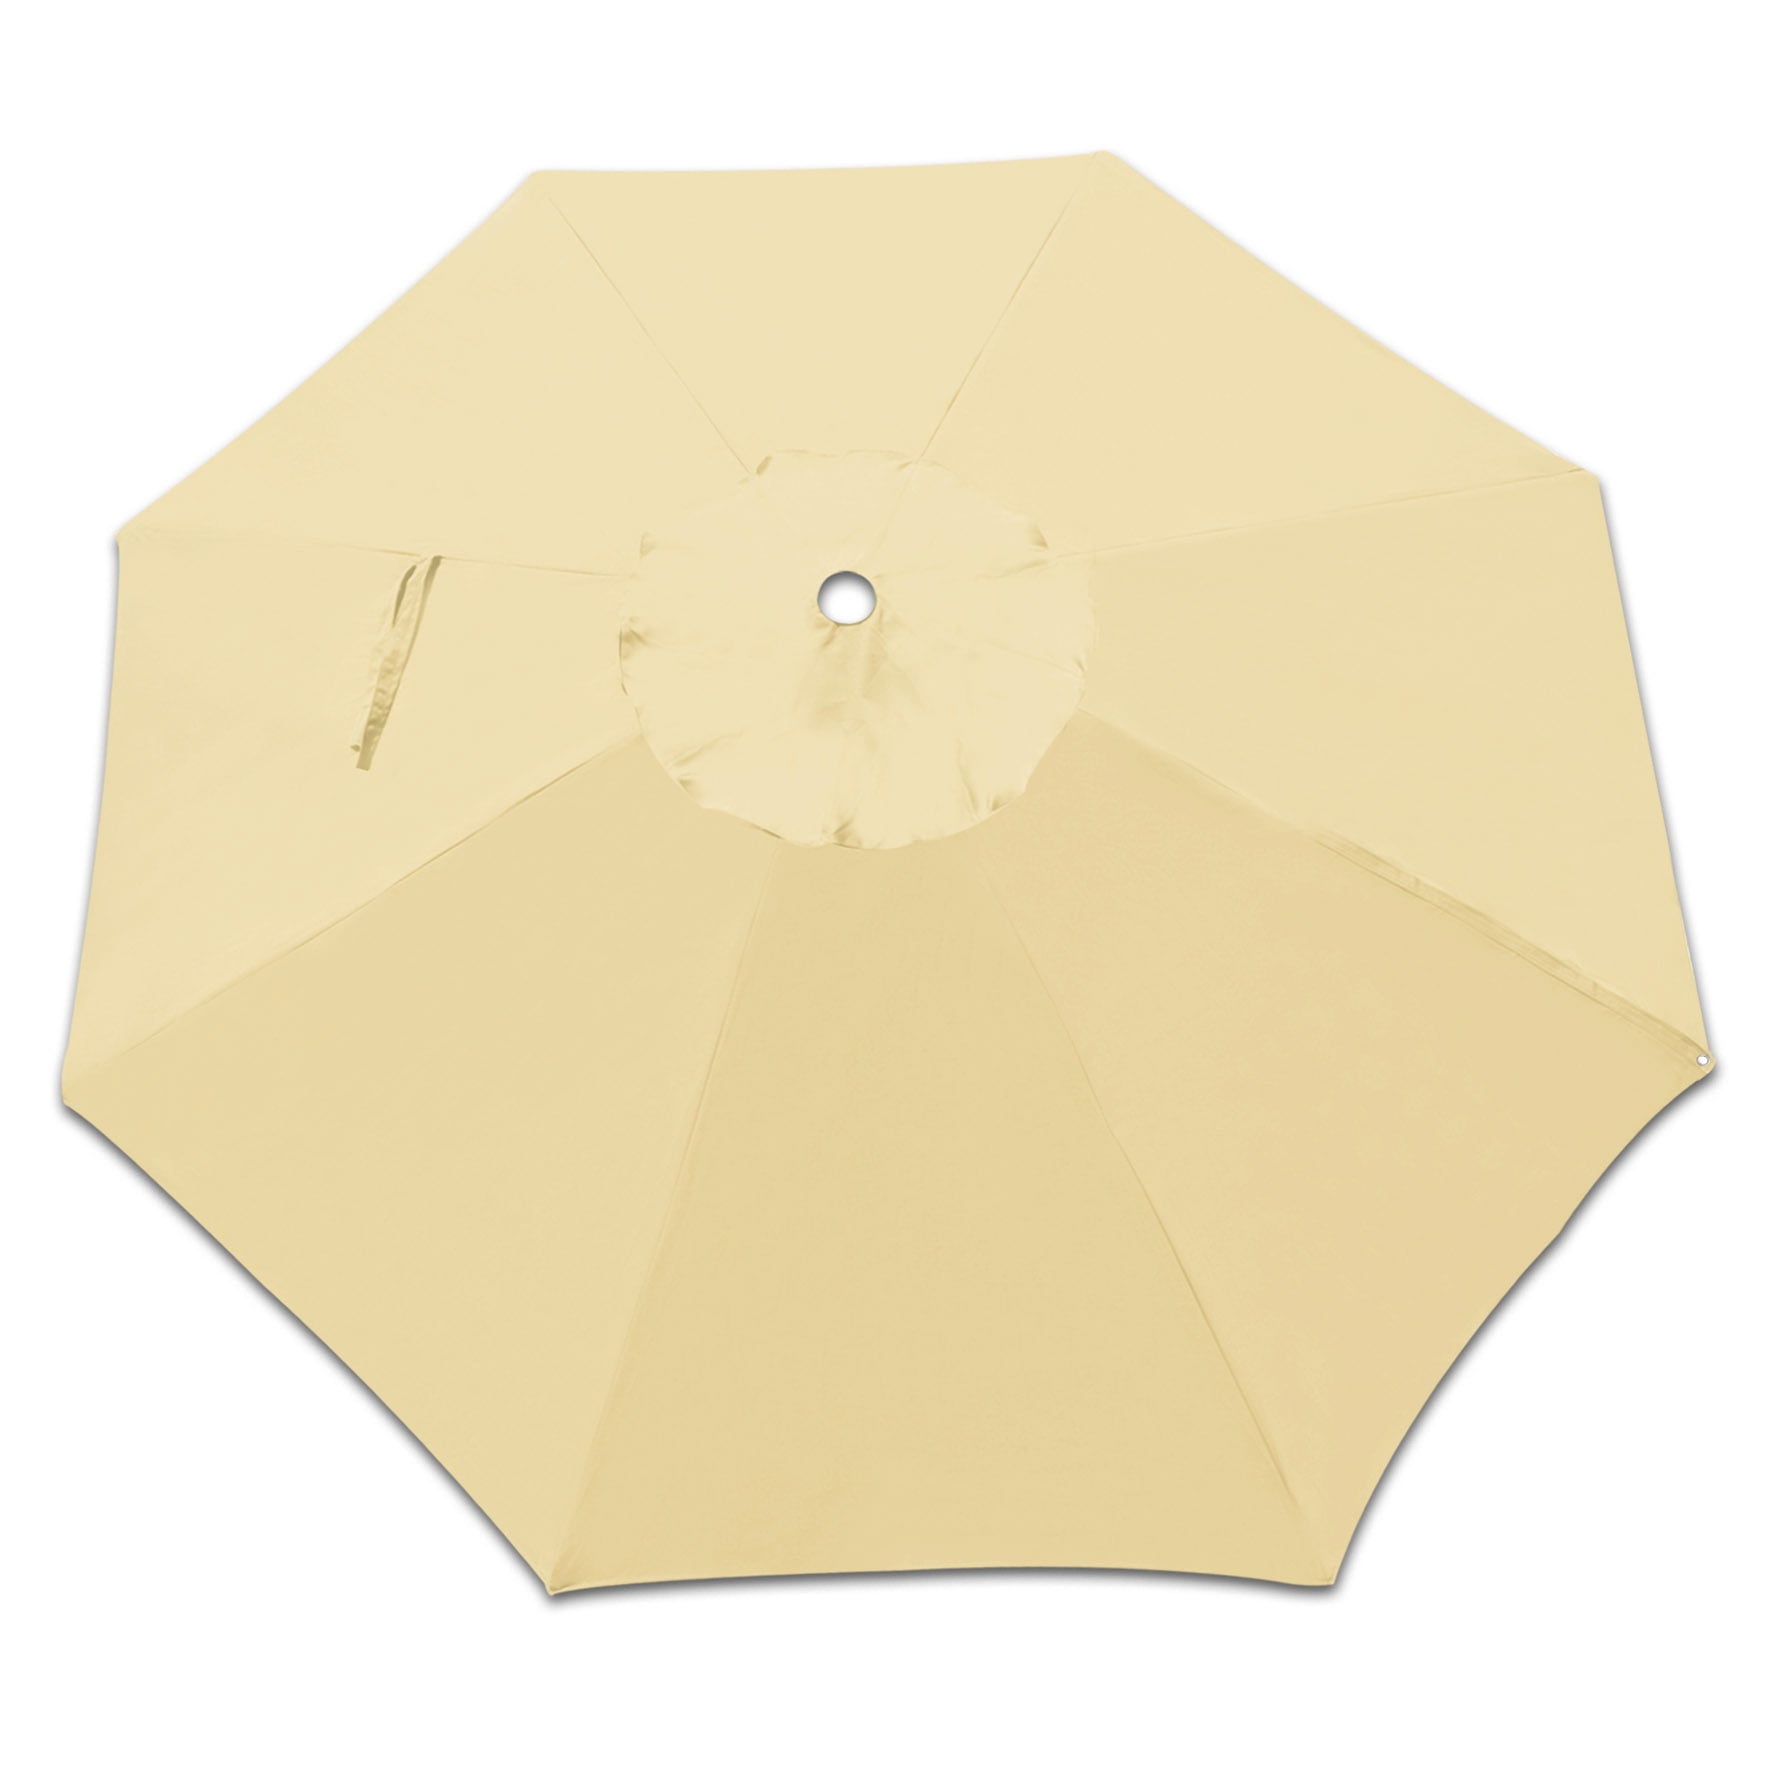 Replacement Canopy for 11.5ft Round ROME Cantilever Patio Umbrella Cover Top